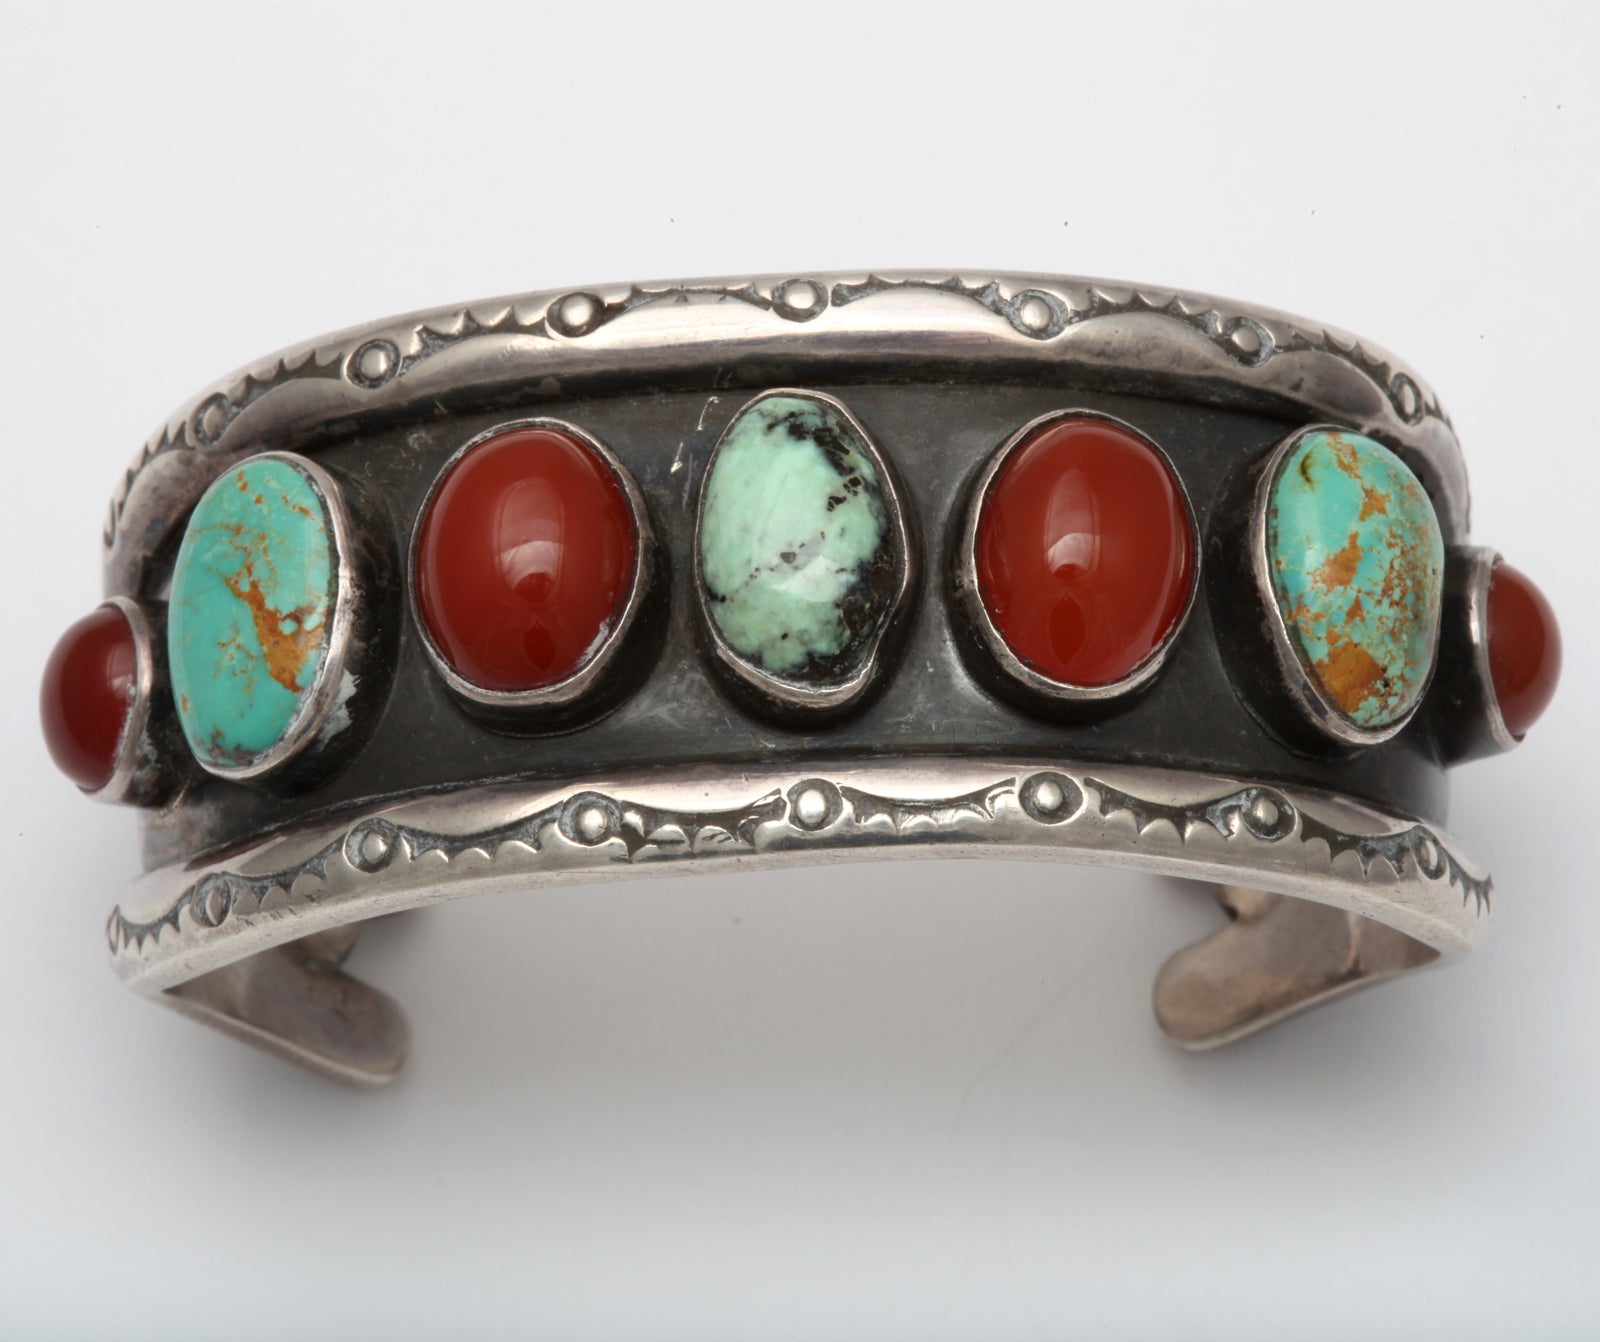 The colors of matrix turquoise and carnelian are a warm and beautiful combination in this hand made Native American cuff from Santa Fe. The stones stand out from their anodized silver background made more dramatic by the natural sterling borders. 